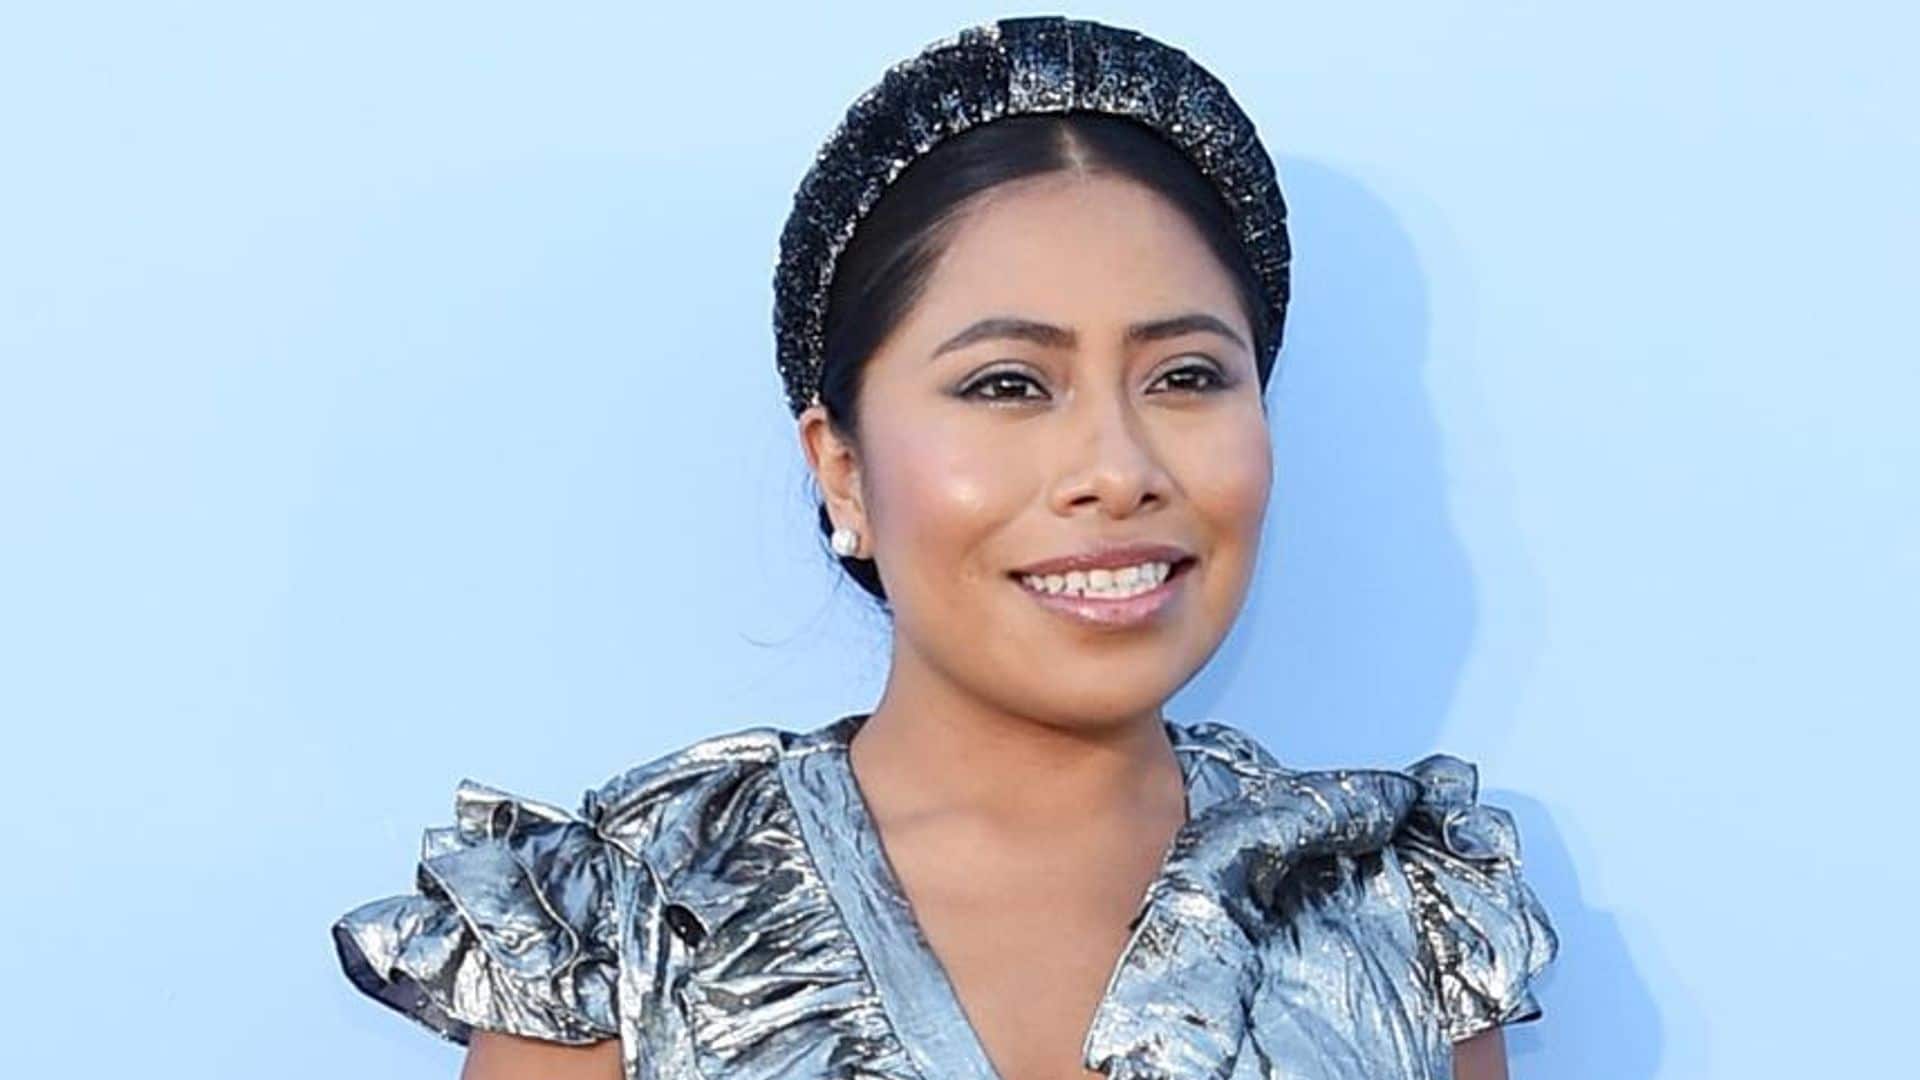 Yalitza Aparicio makes her fashion week debut with a front row seat at Michael Kors Collection